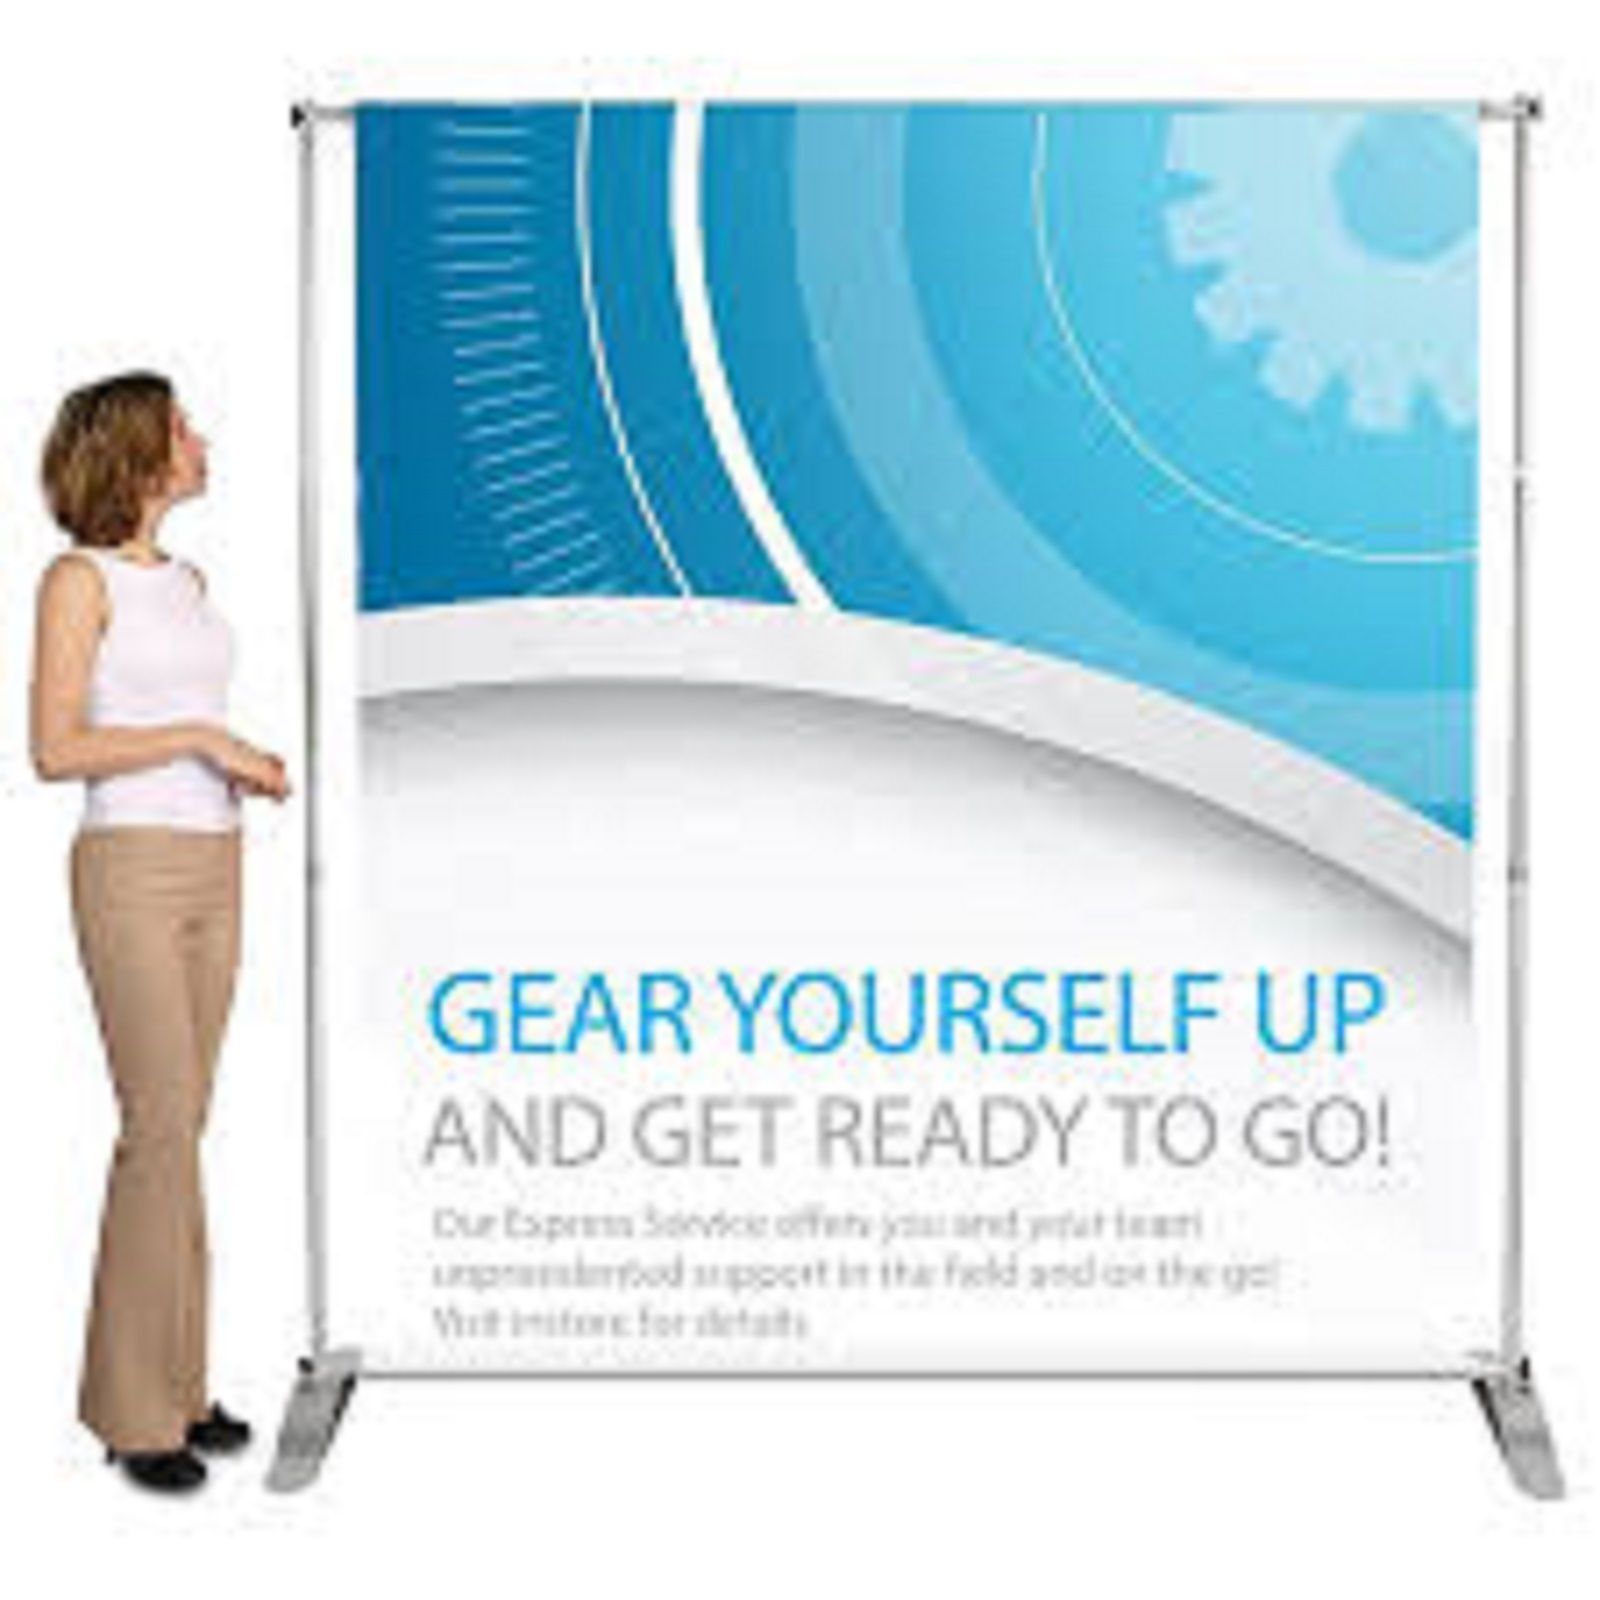 Wall Screen Banner Stand